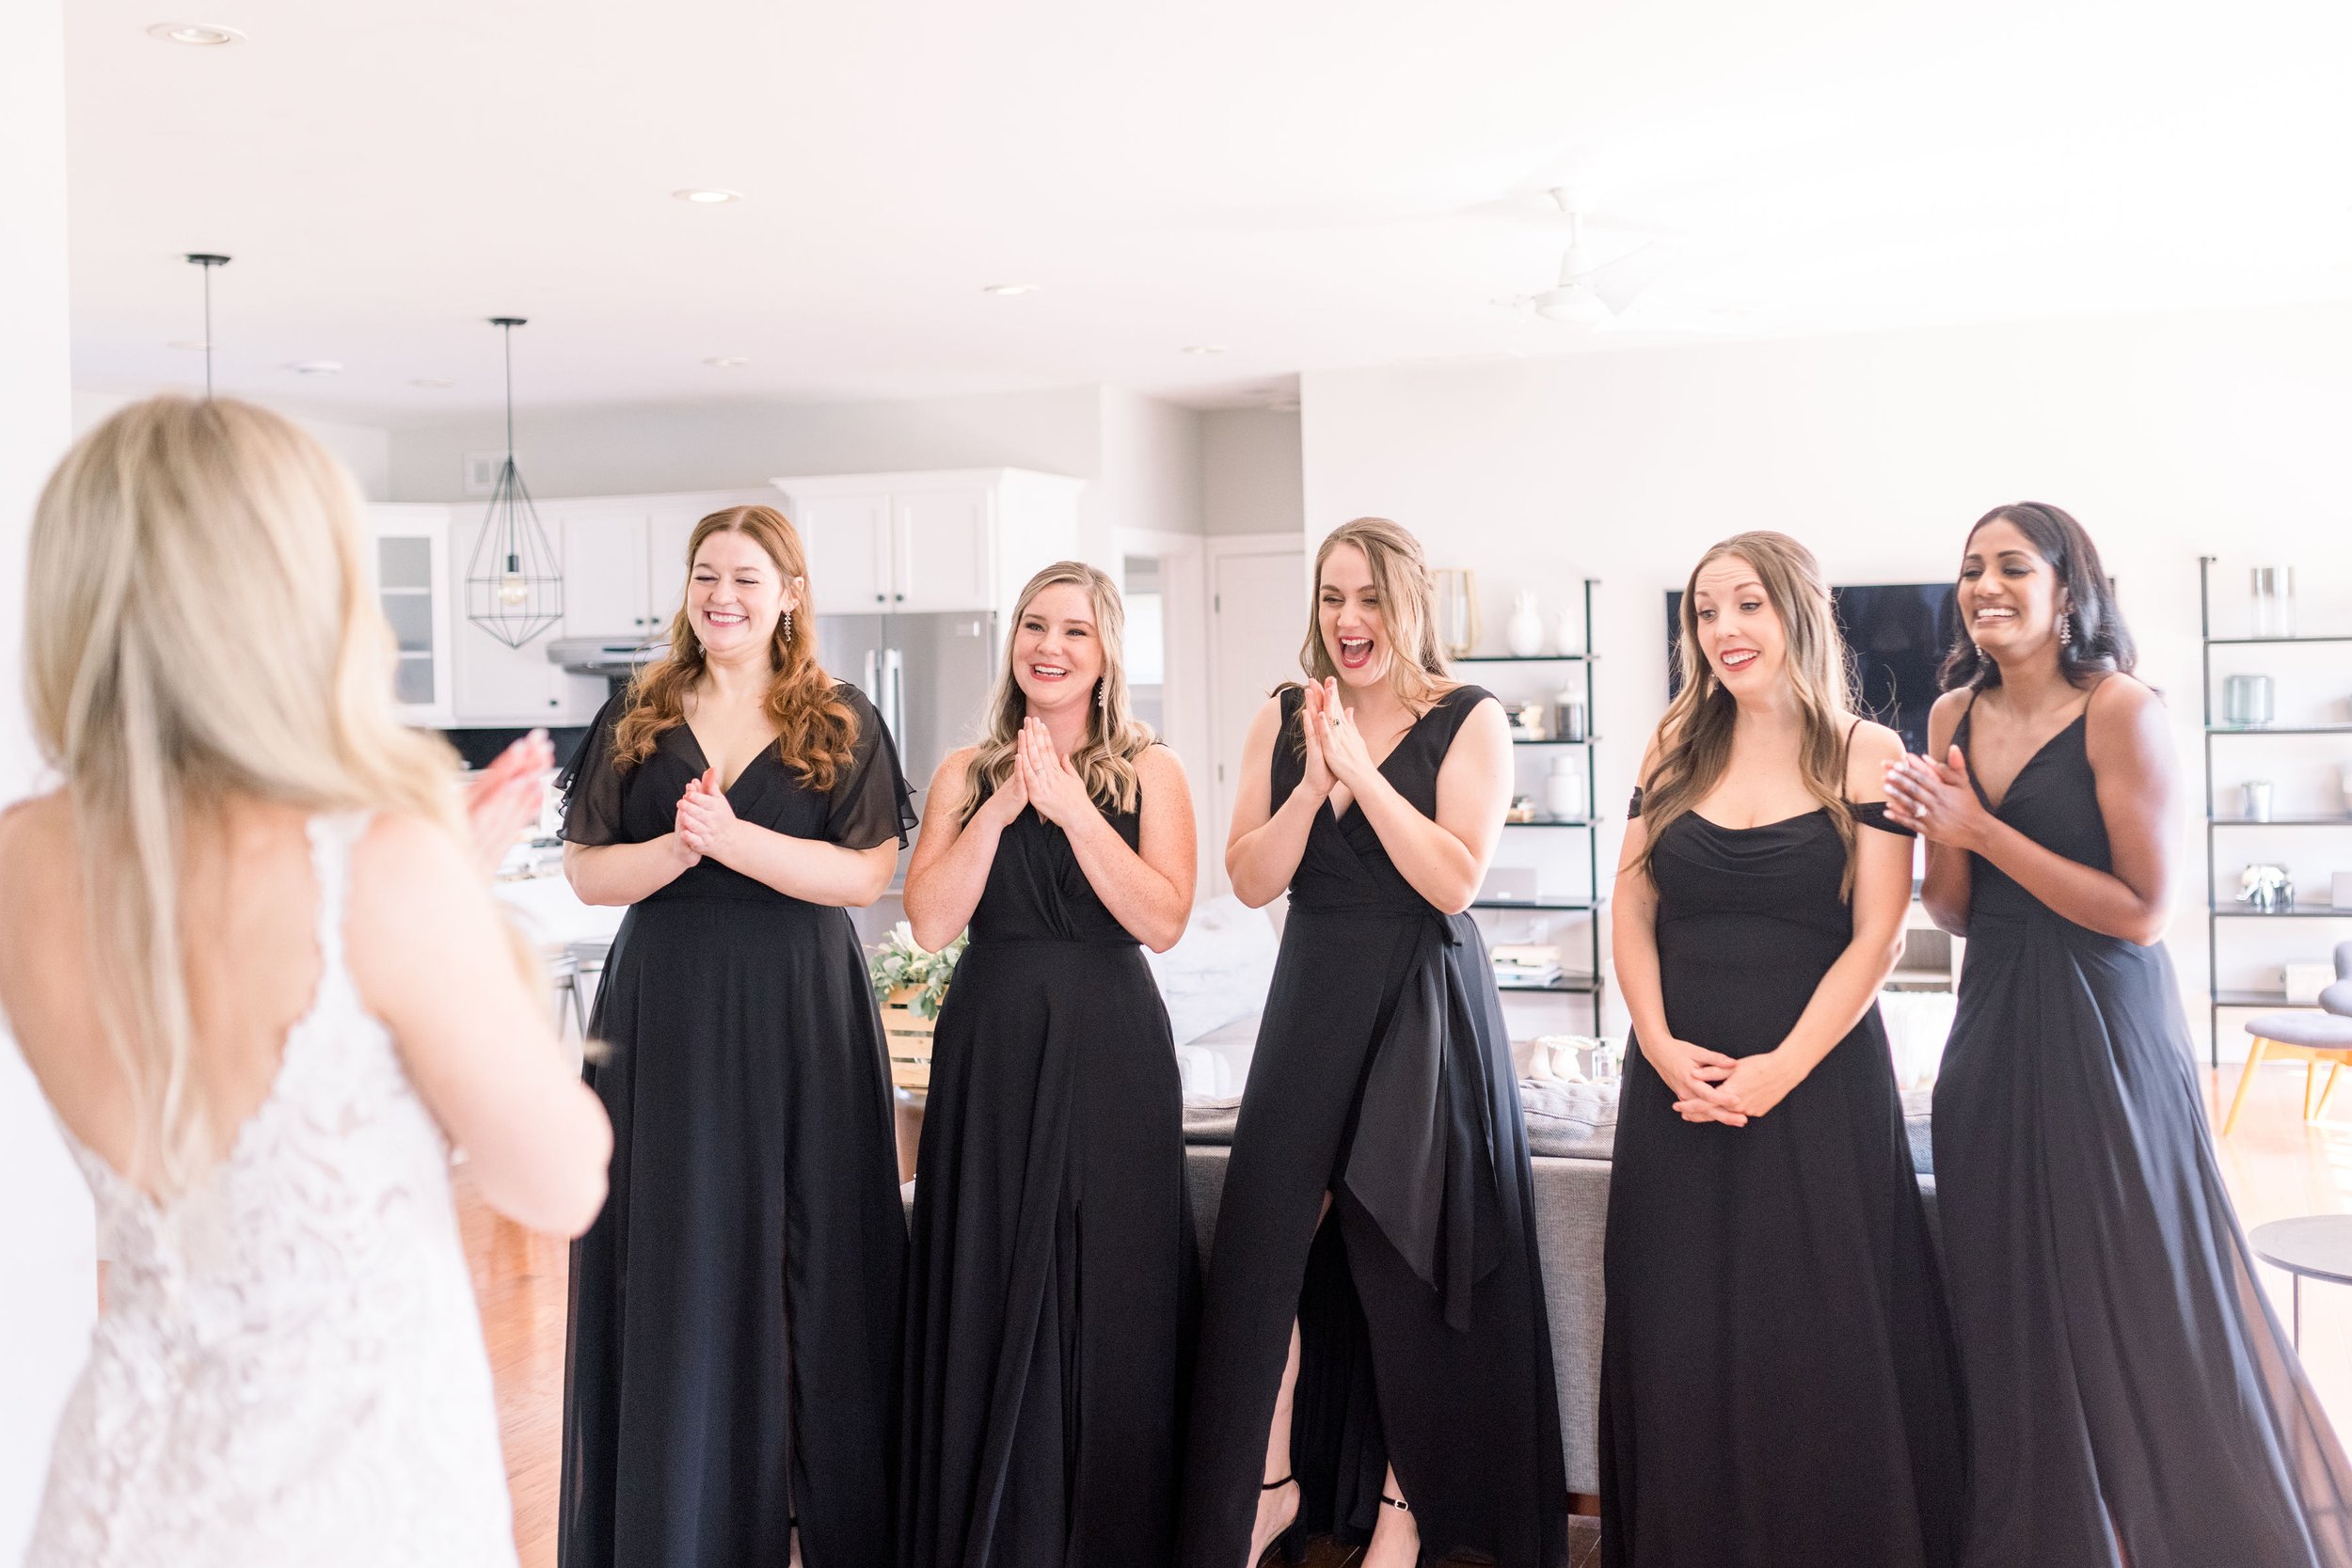  Bridesmaids get a first look at the bride in her wedding gown by Chelsea Mason Photography. first look with bridesmaids #ChelseaMasonPhotography #ChelseaMasonWeddings #PrinceEdwardsCountyWeddings #SandbanksWeddings #ONweddingphotographer 